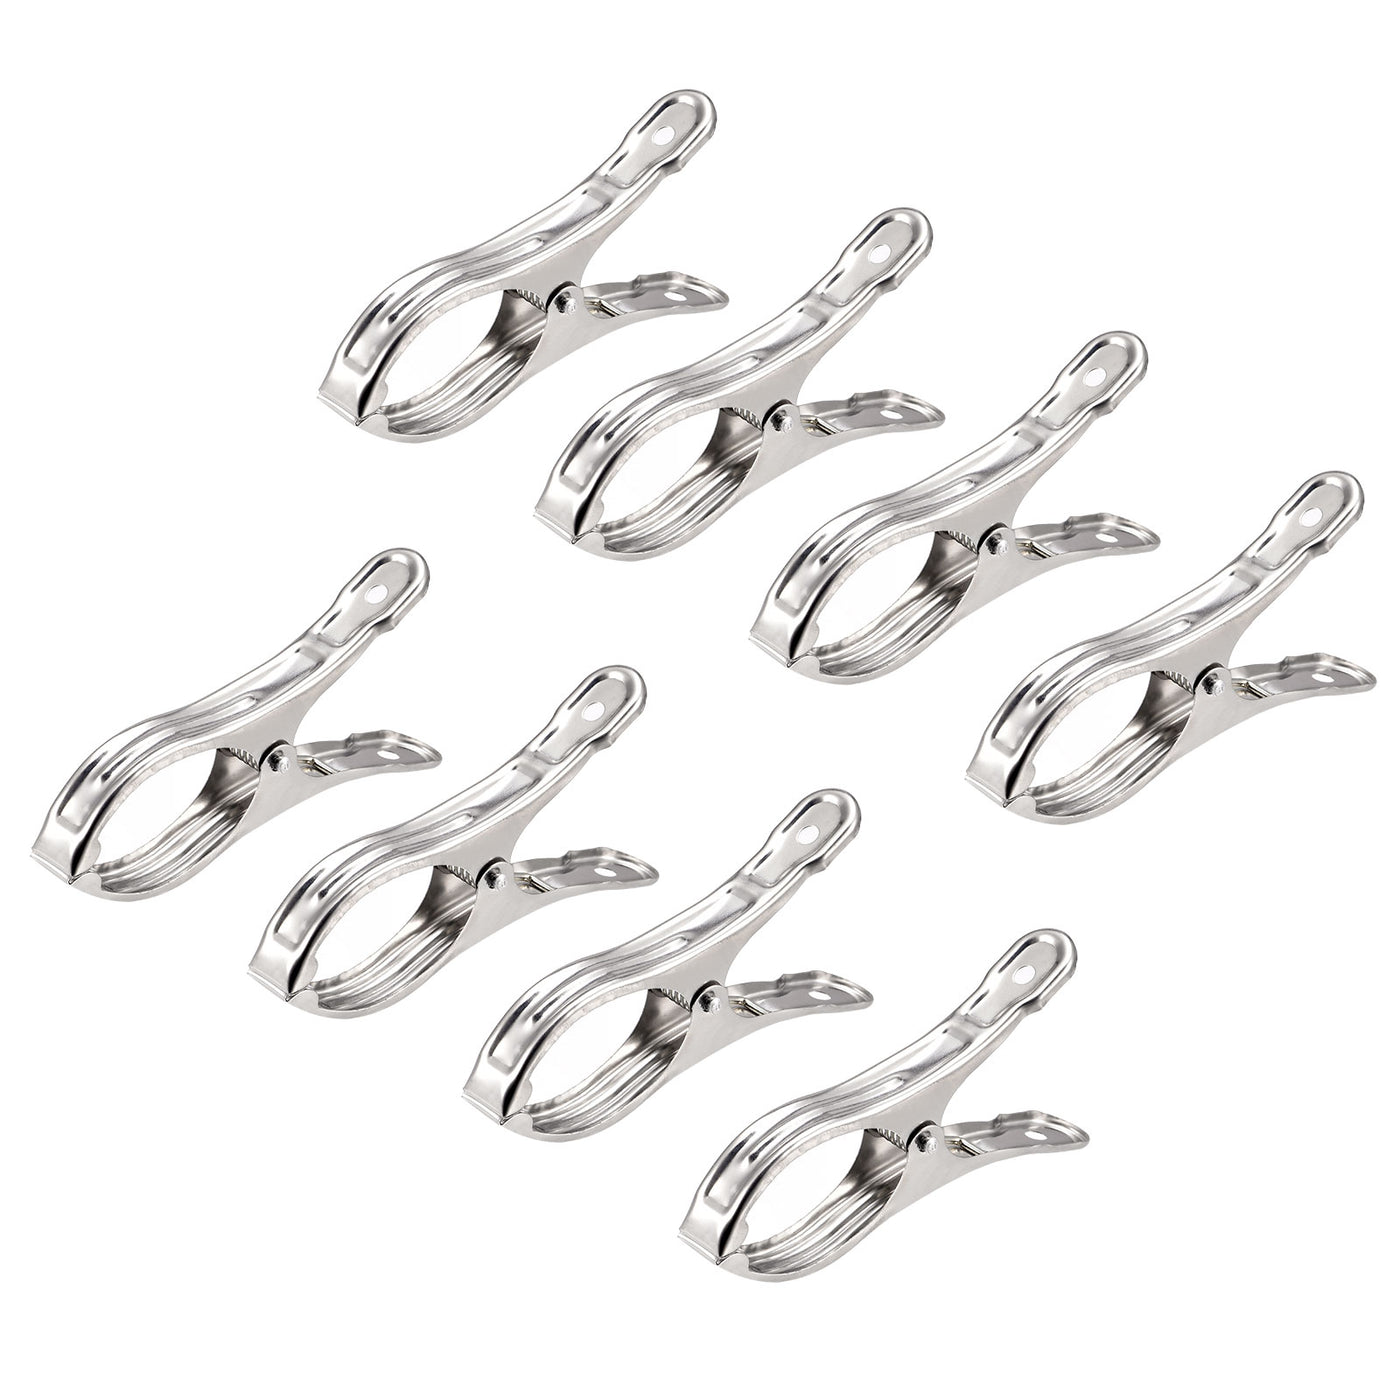 uxcell Uxcell Tablecloth Clips - 90mm Stainless Steel Clamps for Fixing Table Cloth Hanging Clothes, 20 Pcs